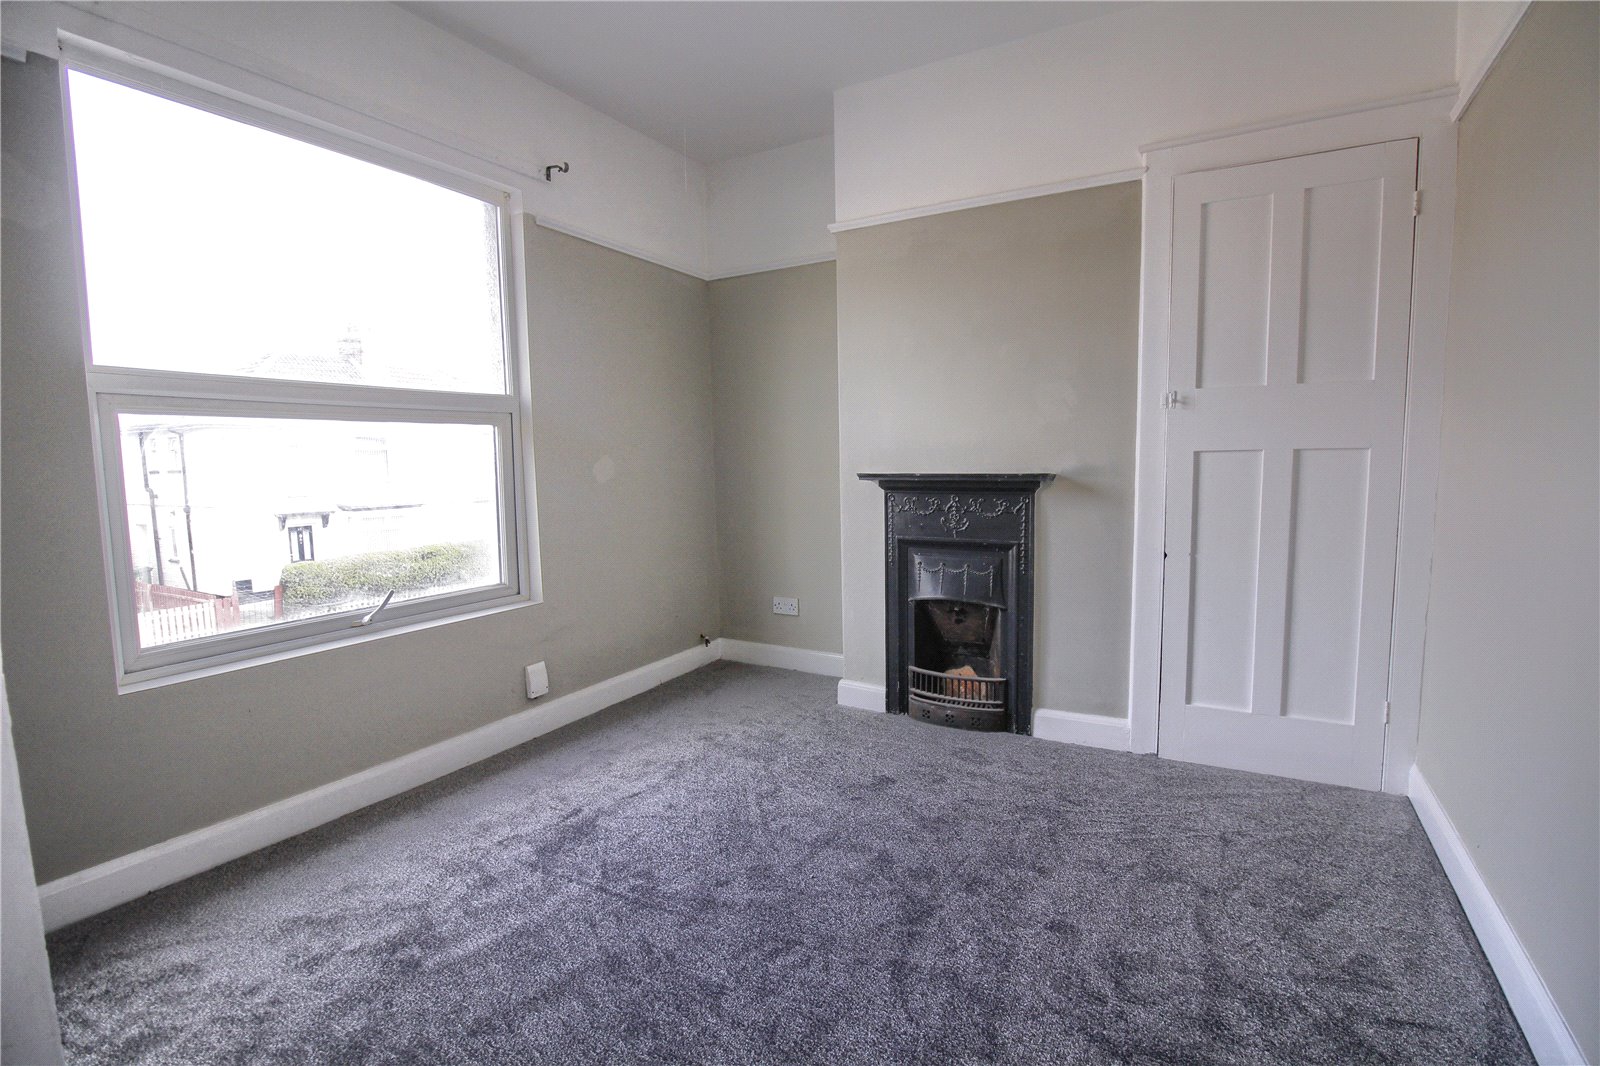 3 bed house to rent in Norton Avenue, Stockton-on-Tees  - Property Image 6